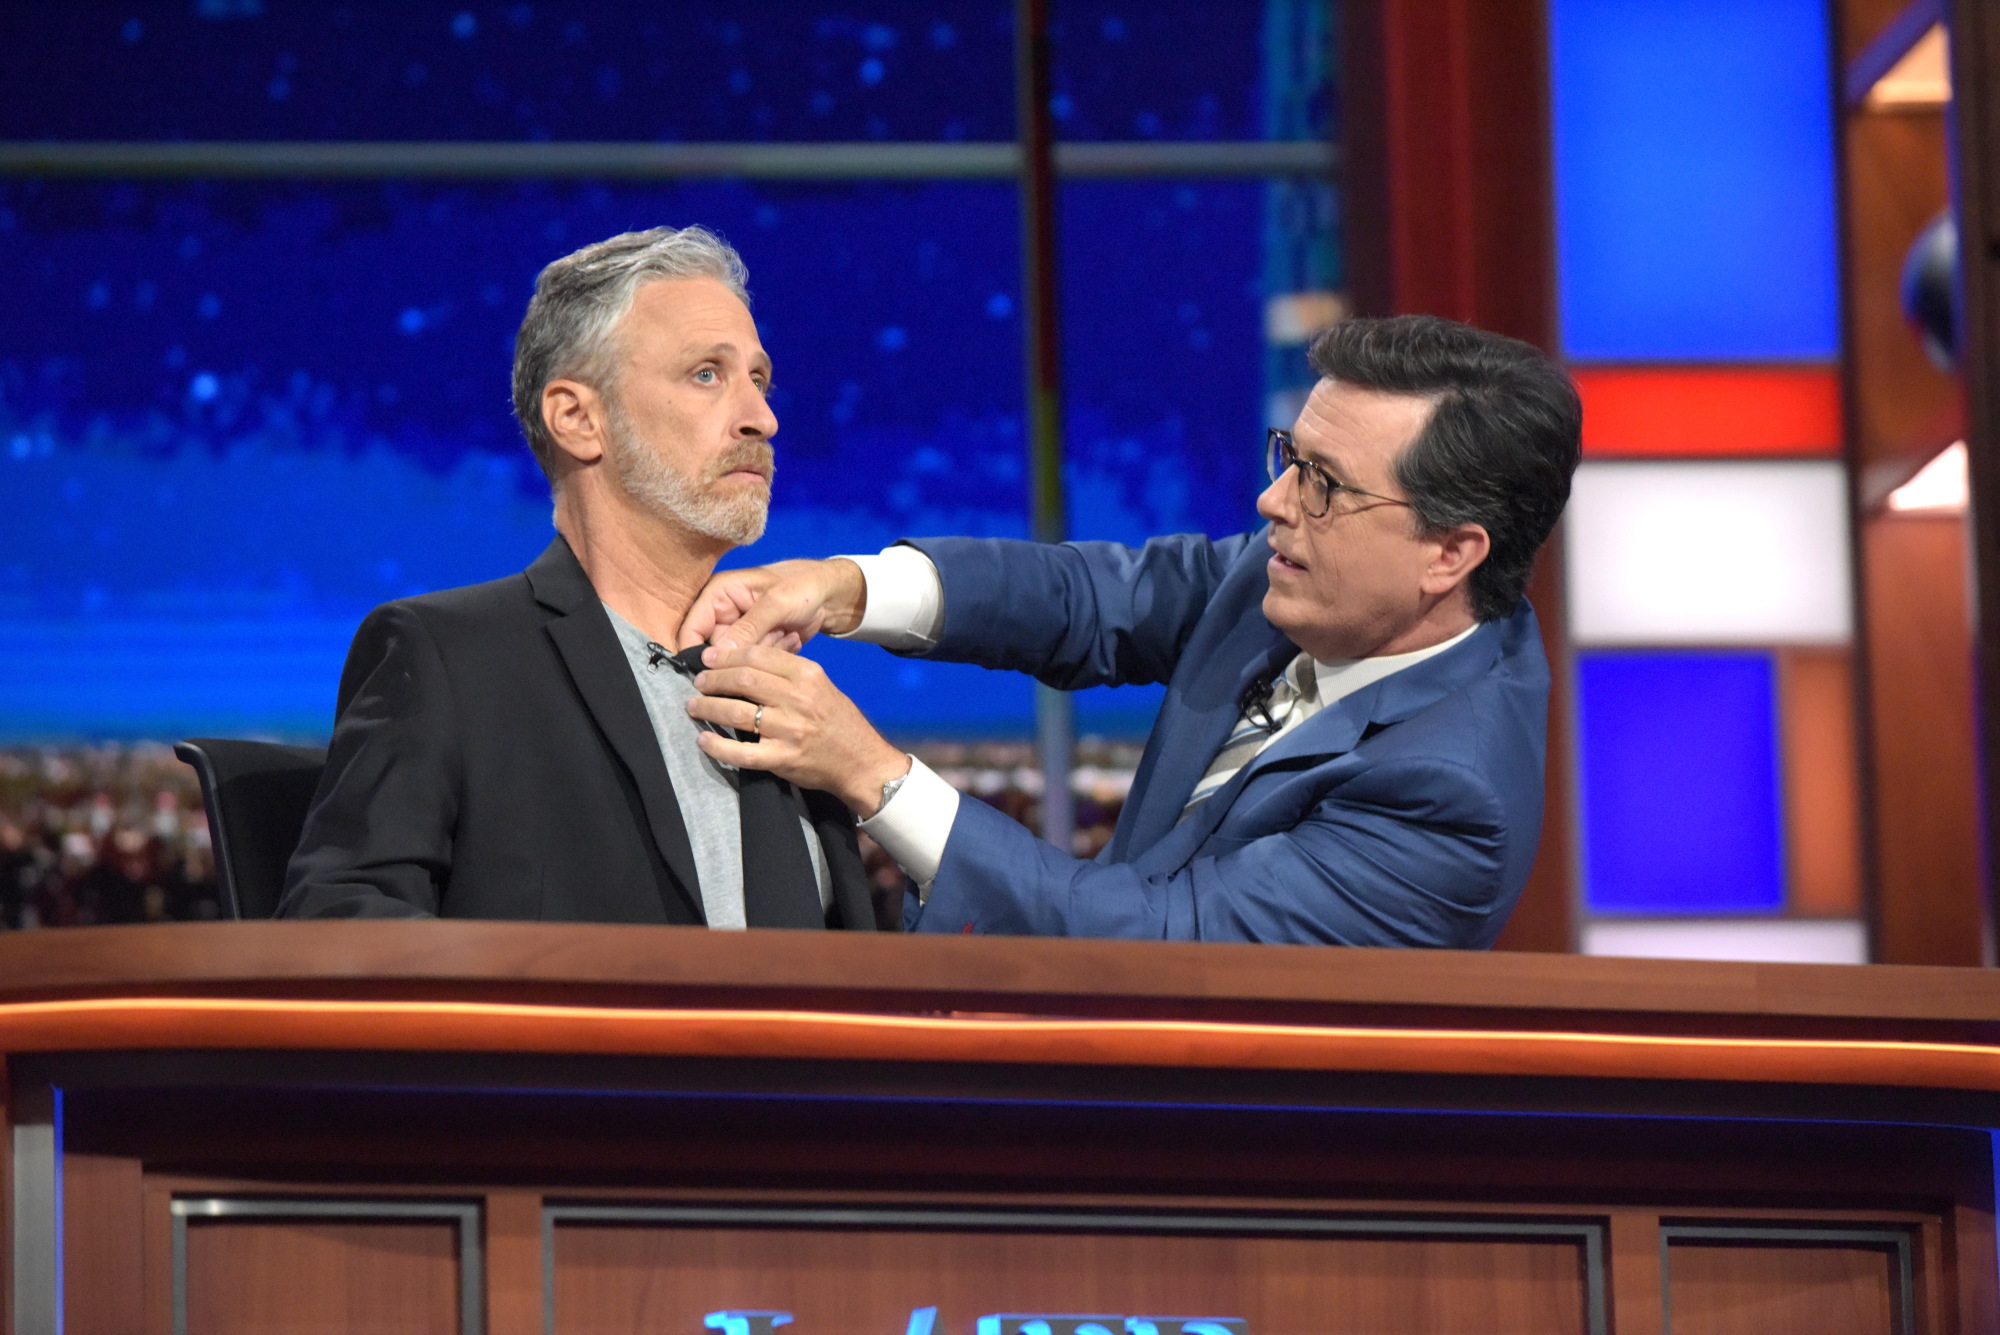 The Late Show with Stephen Colbert Thursday July 21, 2016 in New York. With guest Jon Stewart. (Scott Kowalchyk—CBS Photo Archive—CBS via Getty Images)